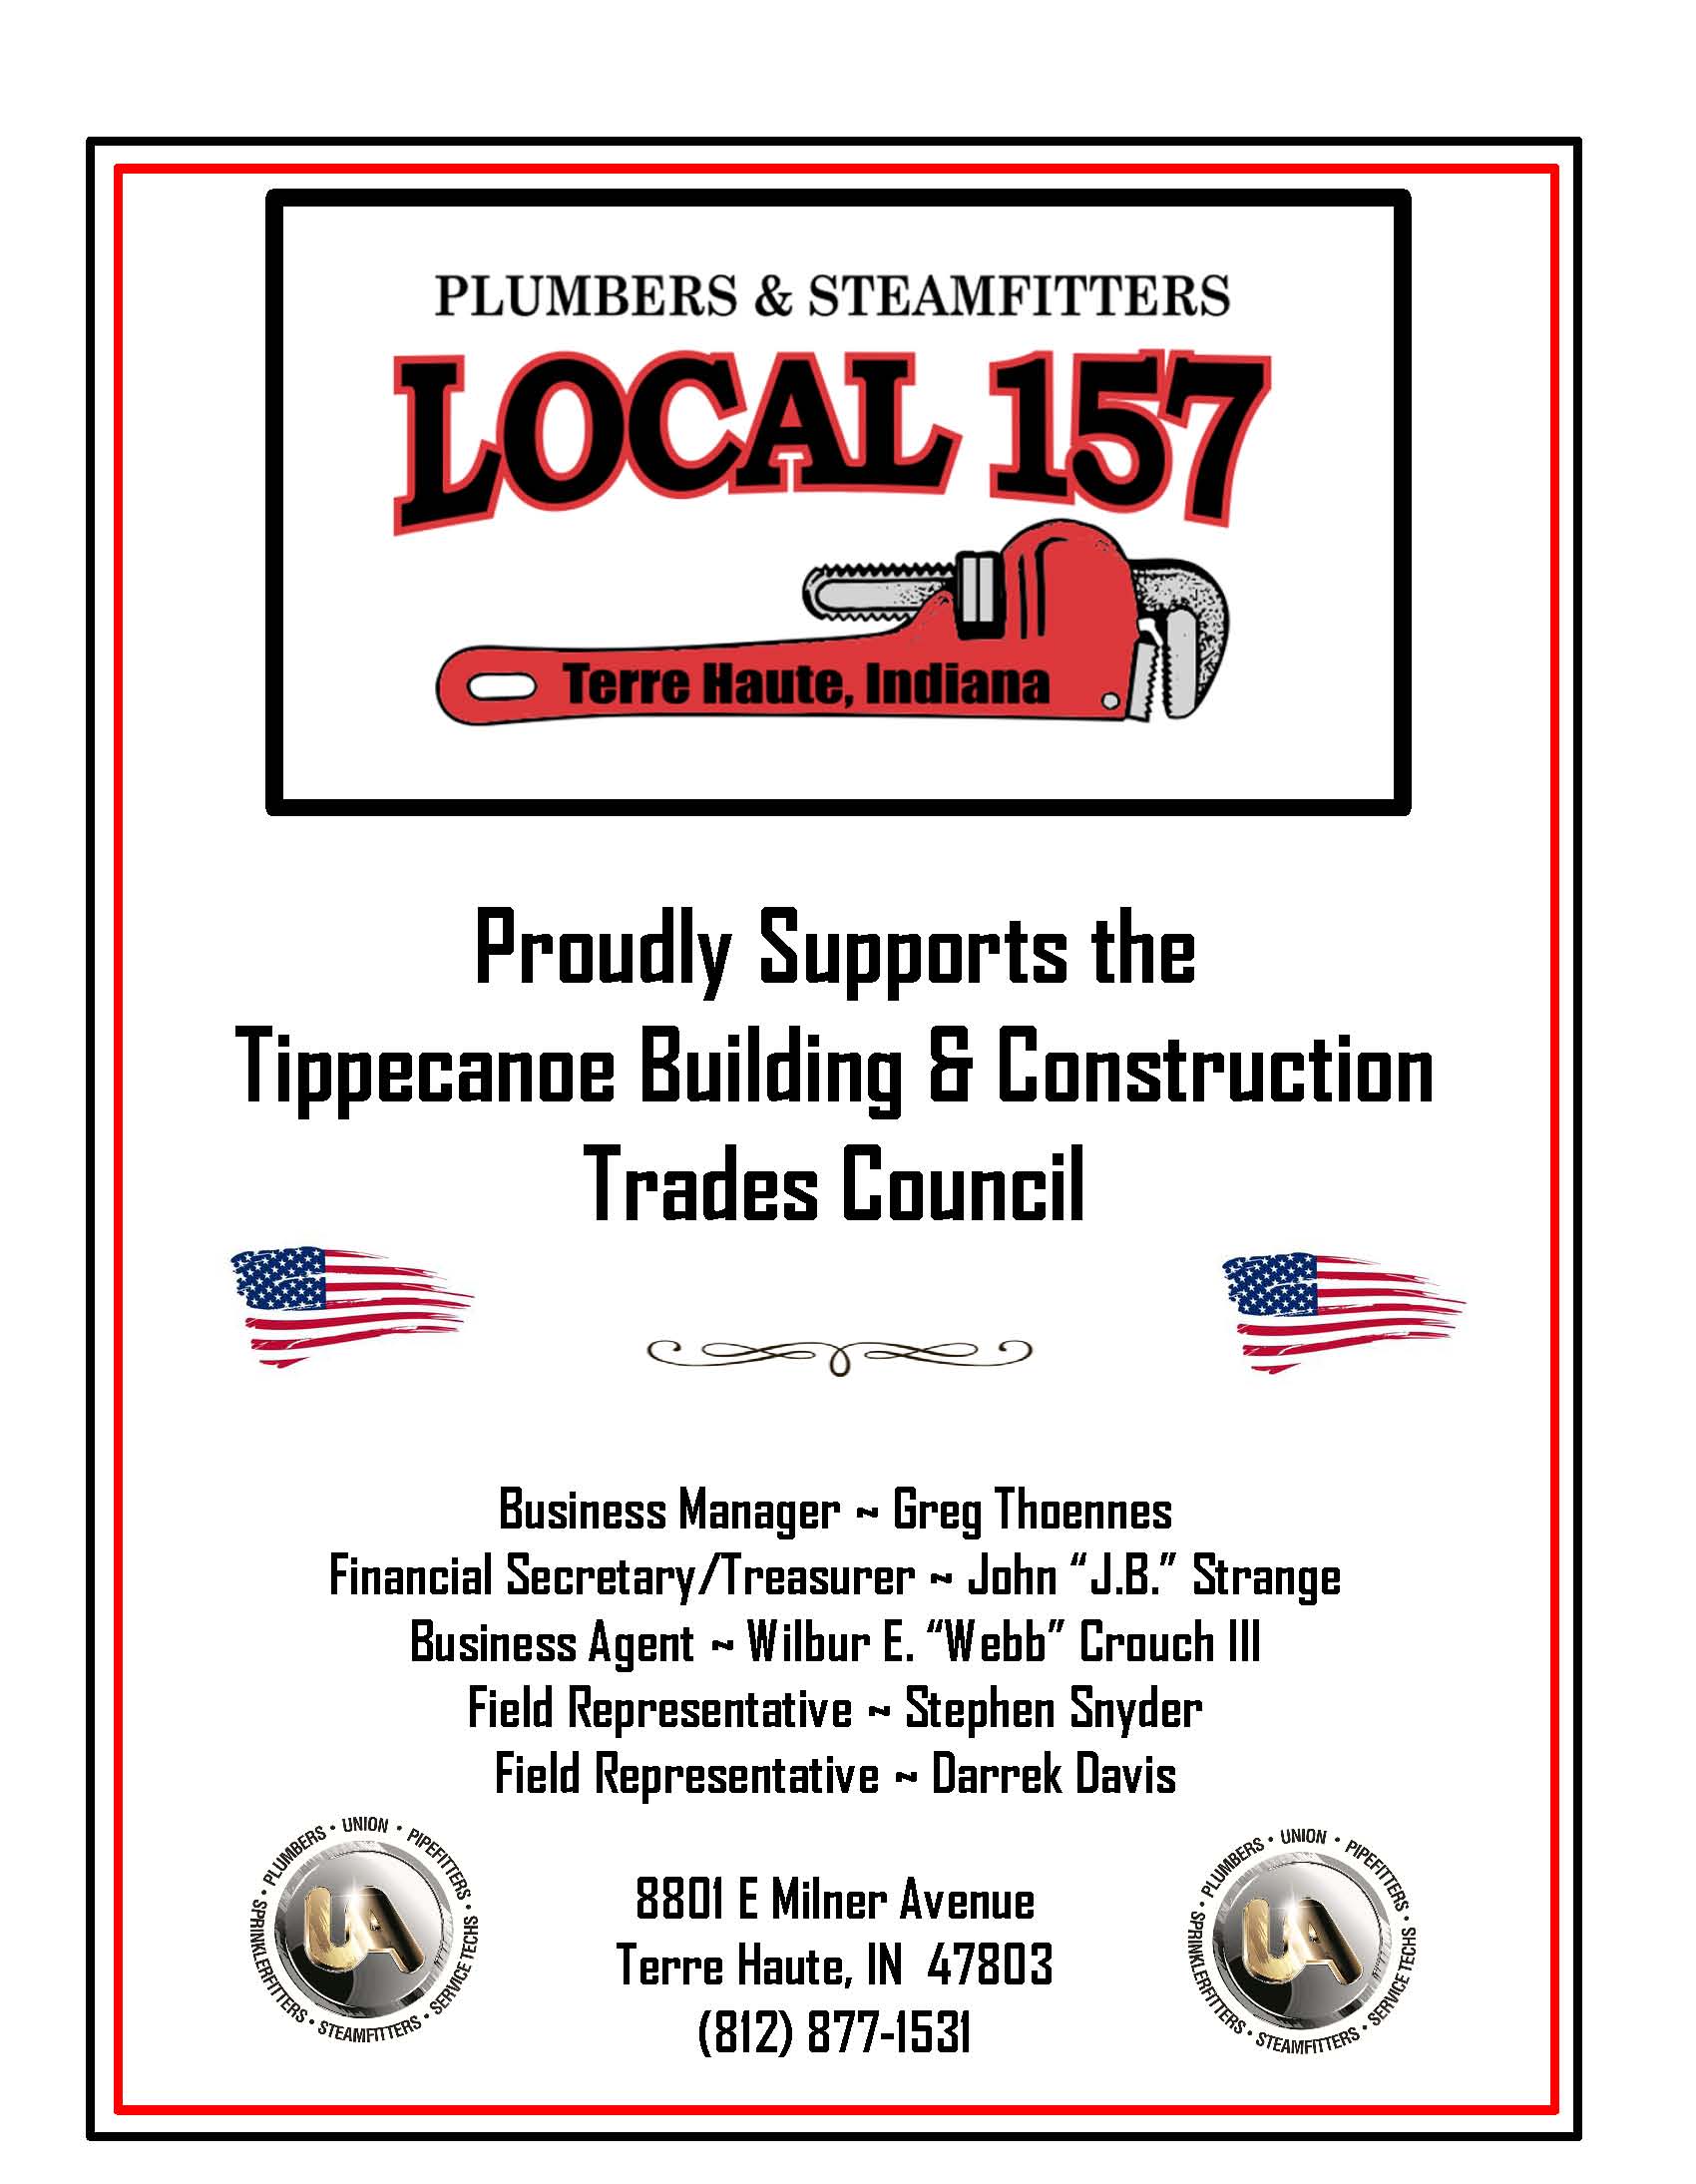 Plumbers and Steamfitters Local 157 